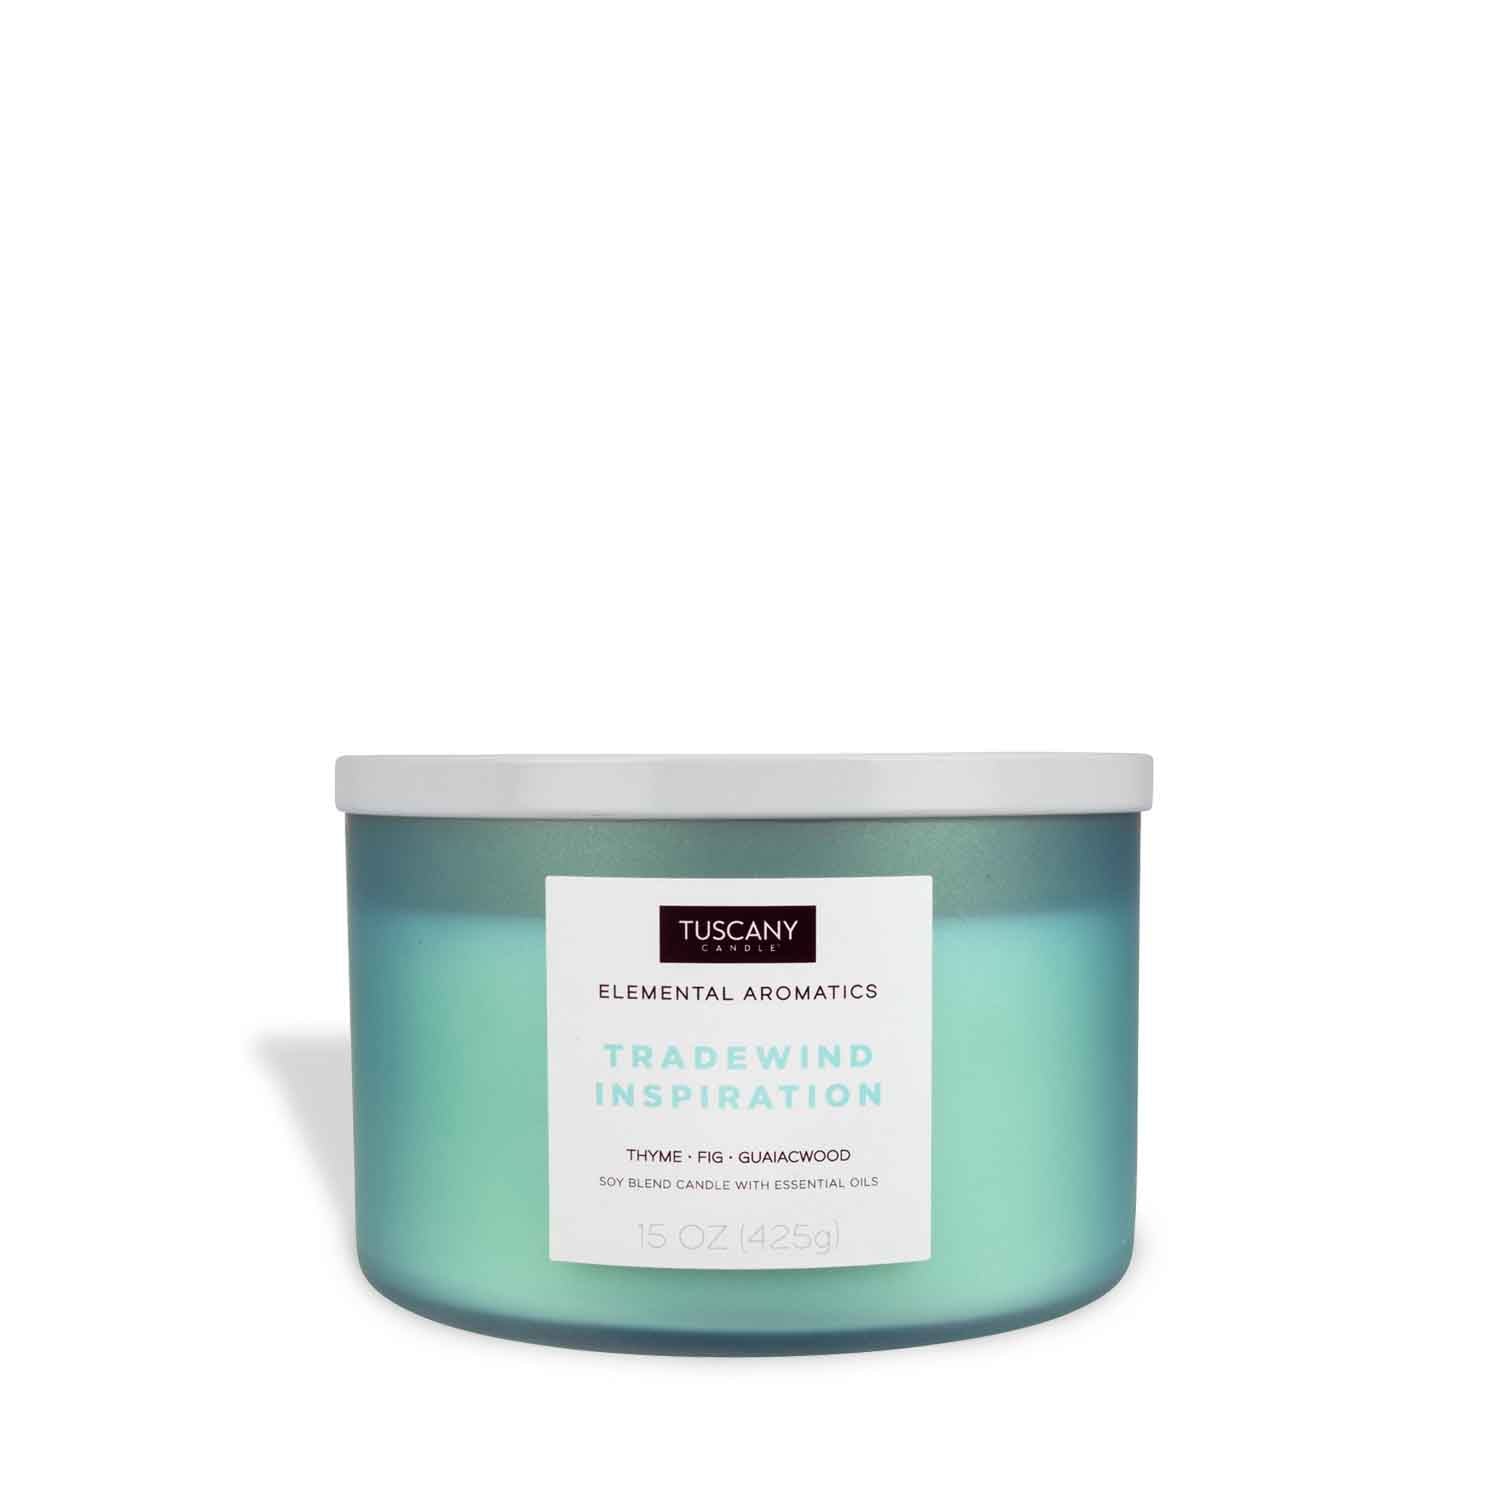 A Tradewind Inspiration scented candle in a tin with a green lid by Tuscany Candle® EVD.